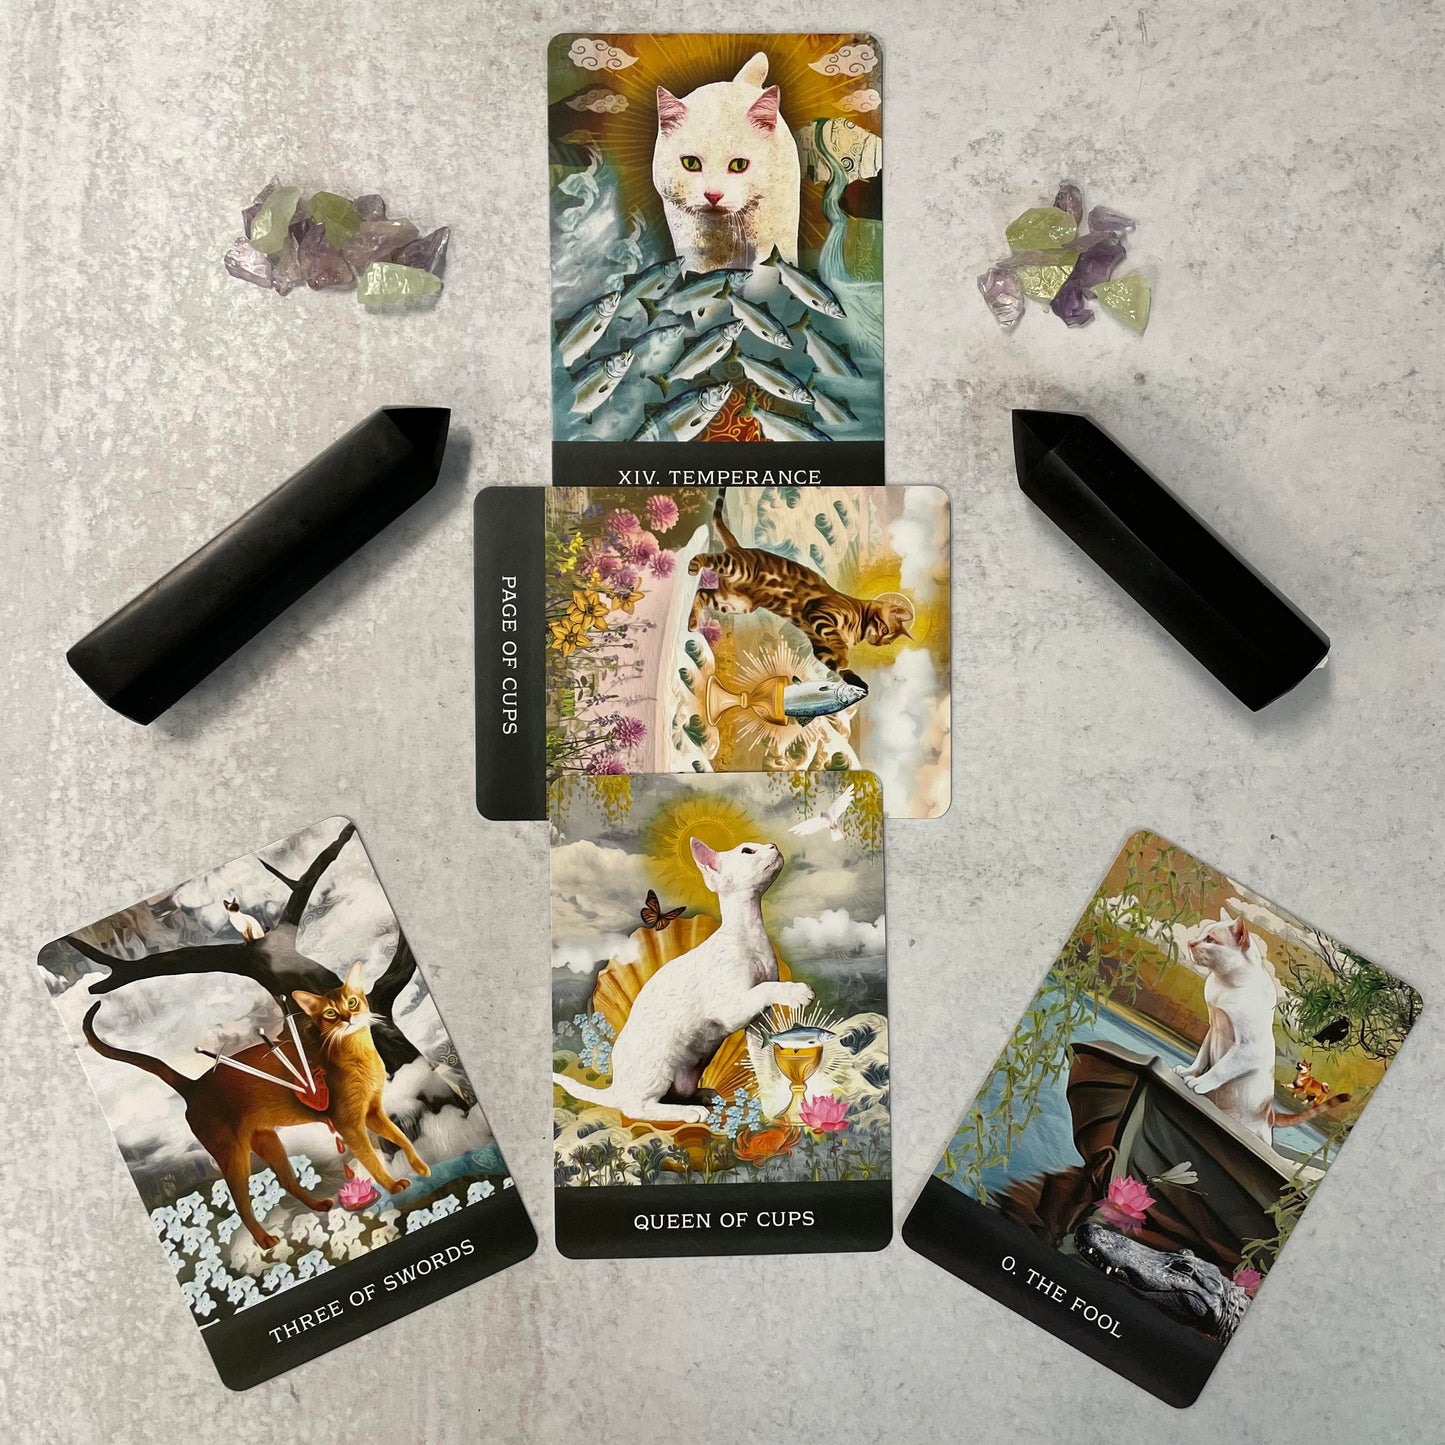 Grimalkin's Curious Cats Tarot: An 80-Card Deck and Guidebook by MJ Cullinane